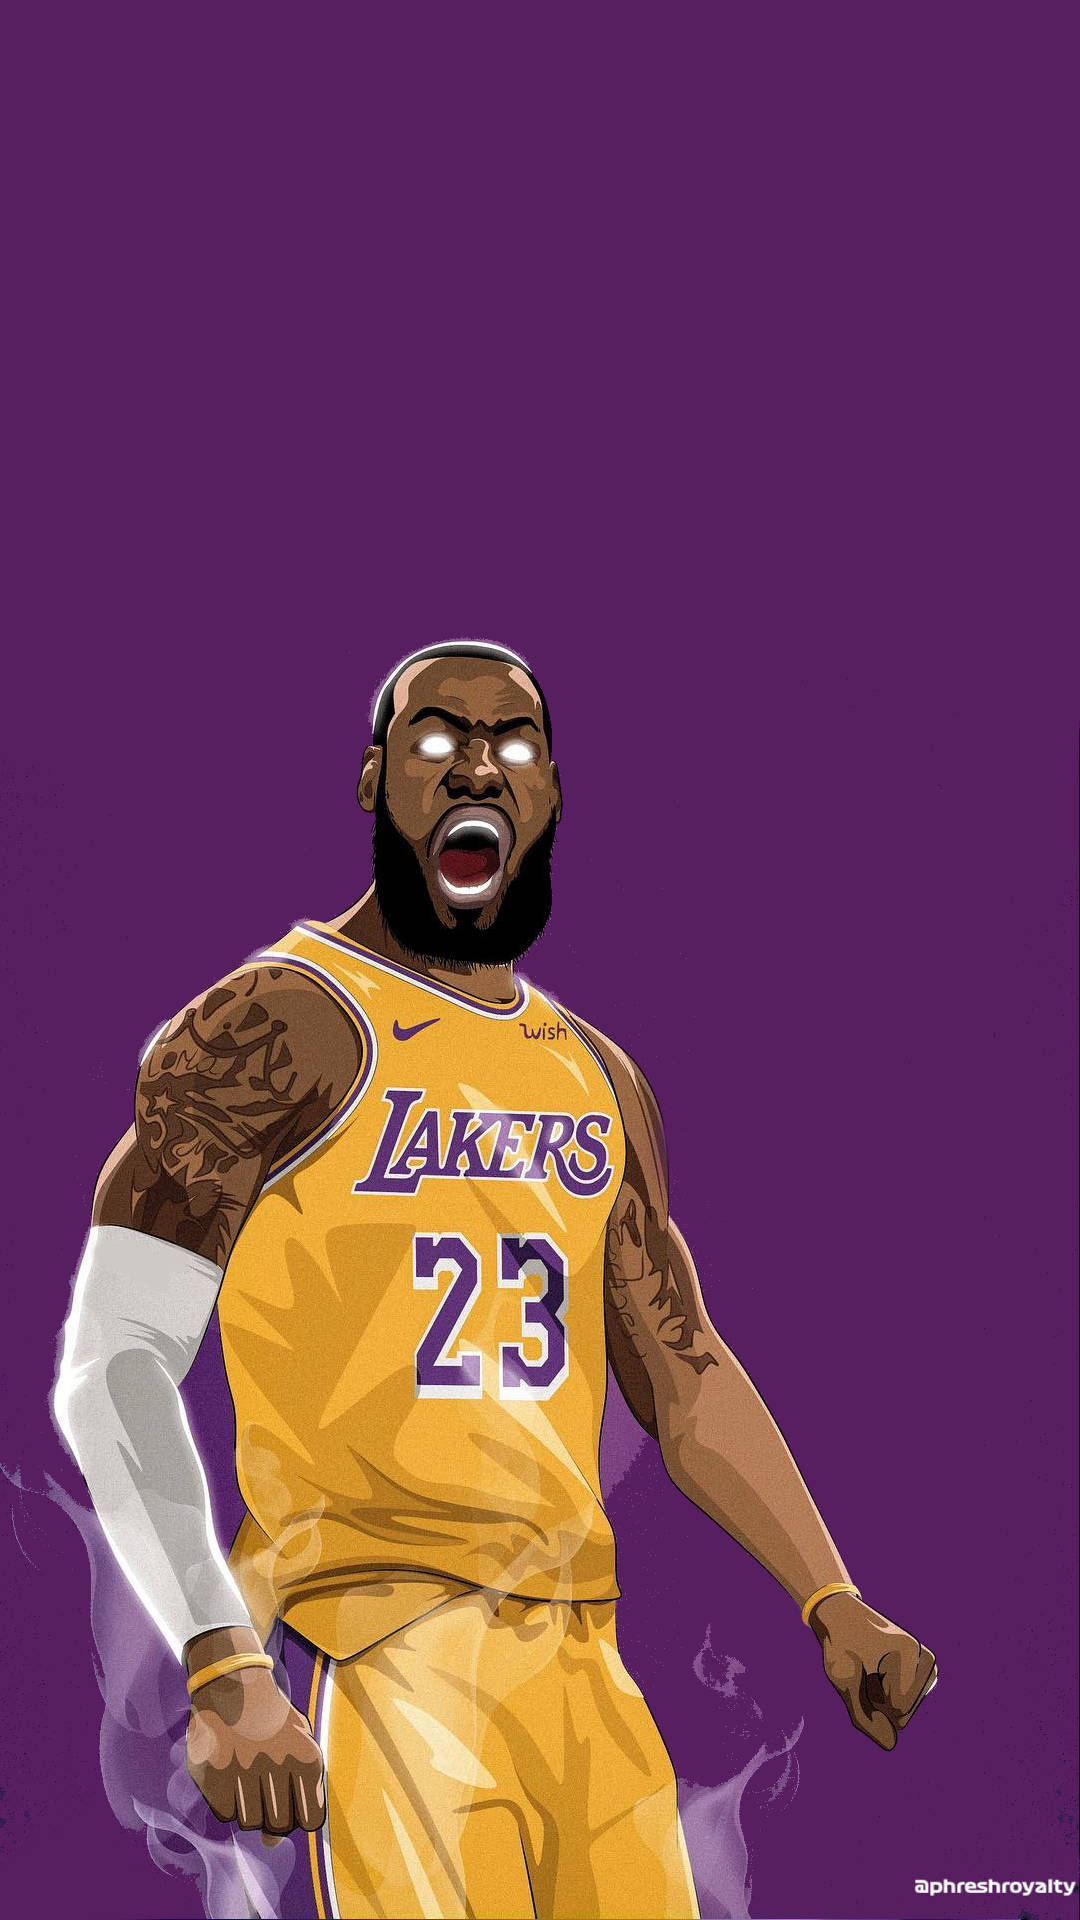 Lebron James’s All Star season for the Los Angeles Lakers. Wallpaper